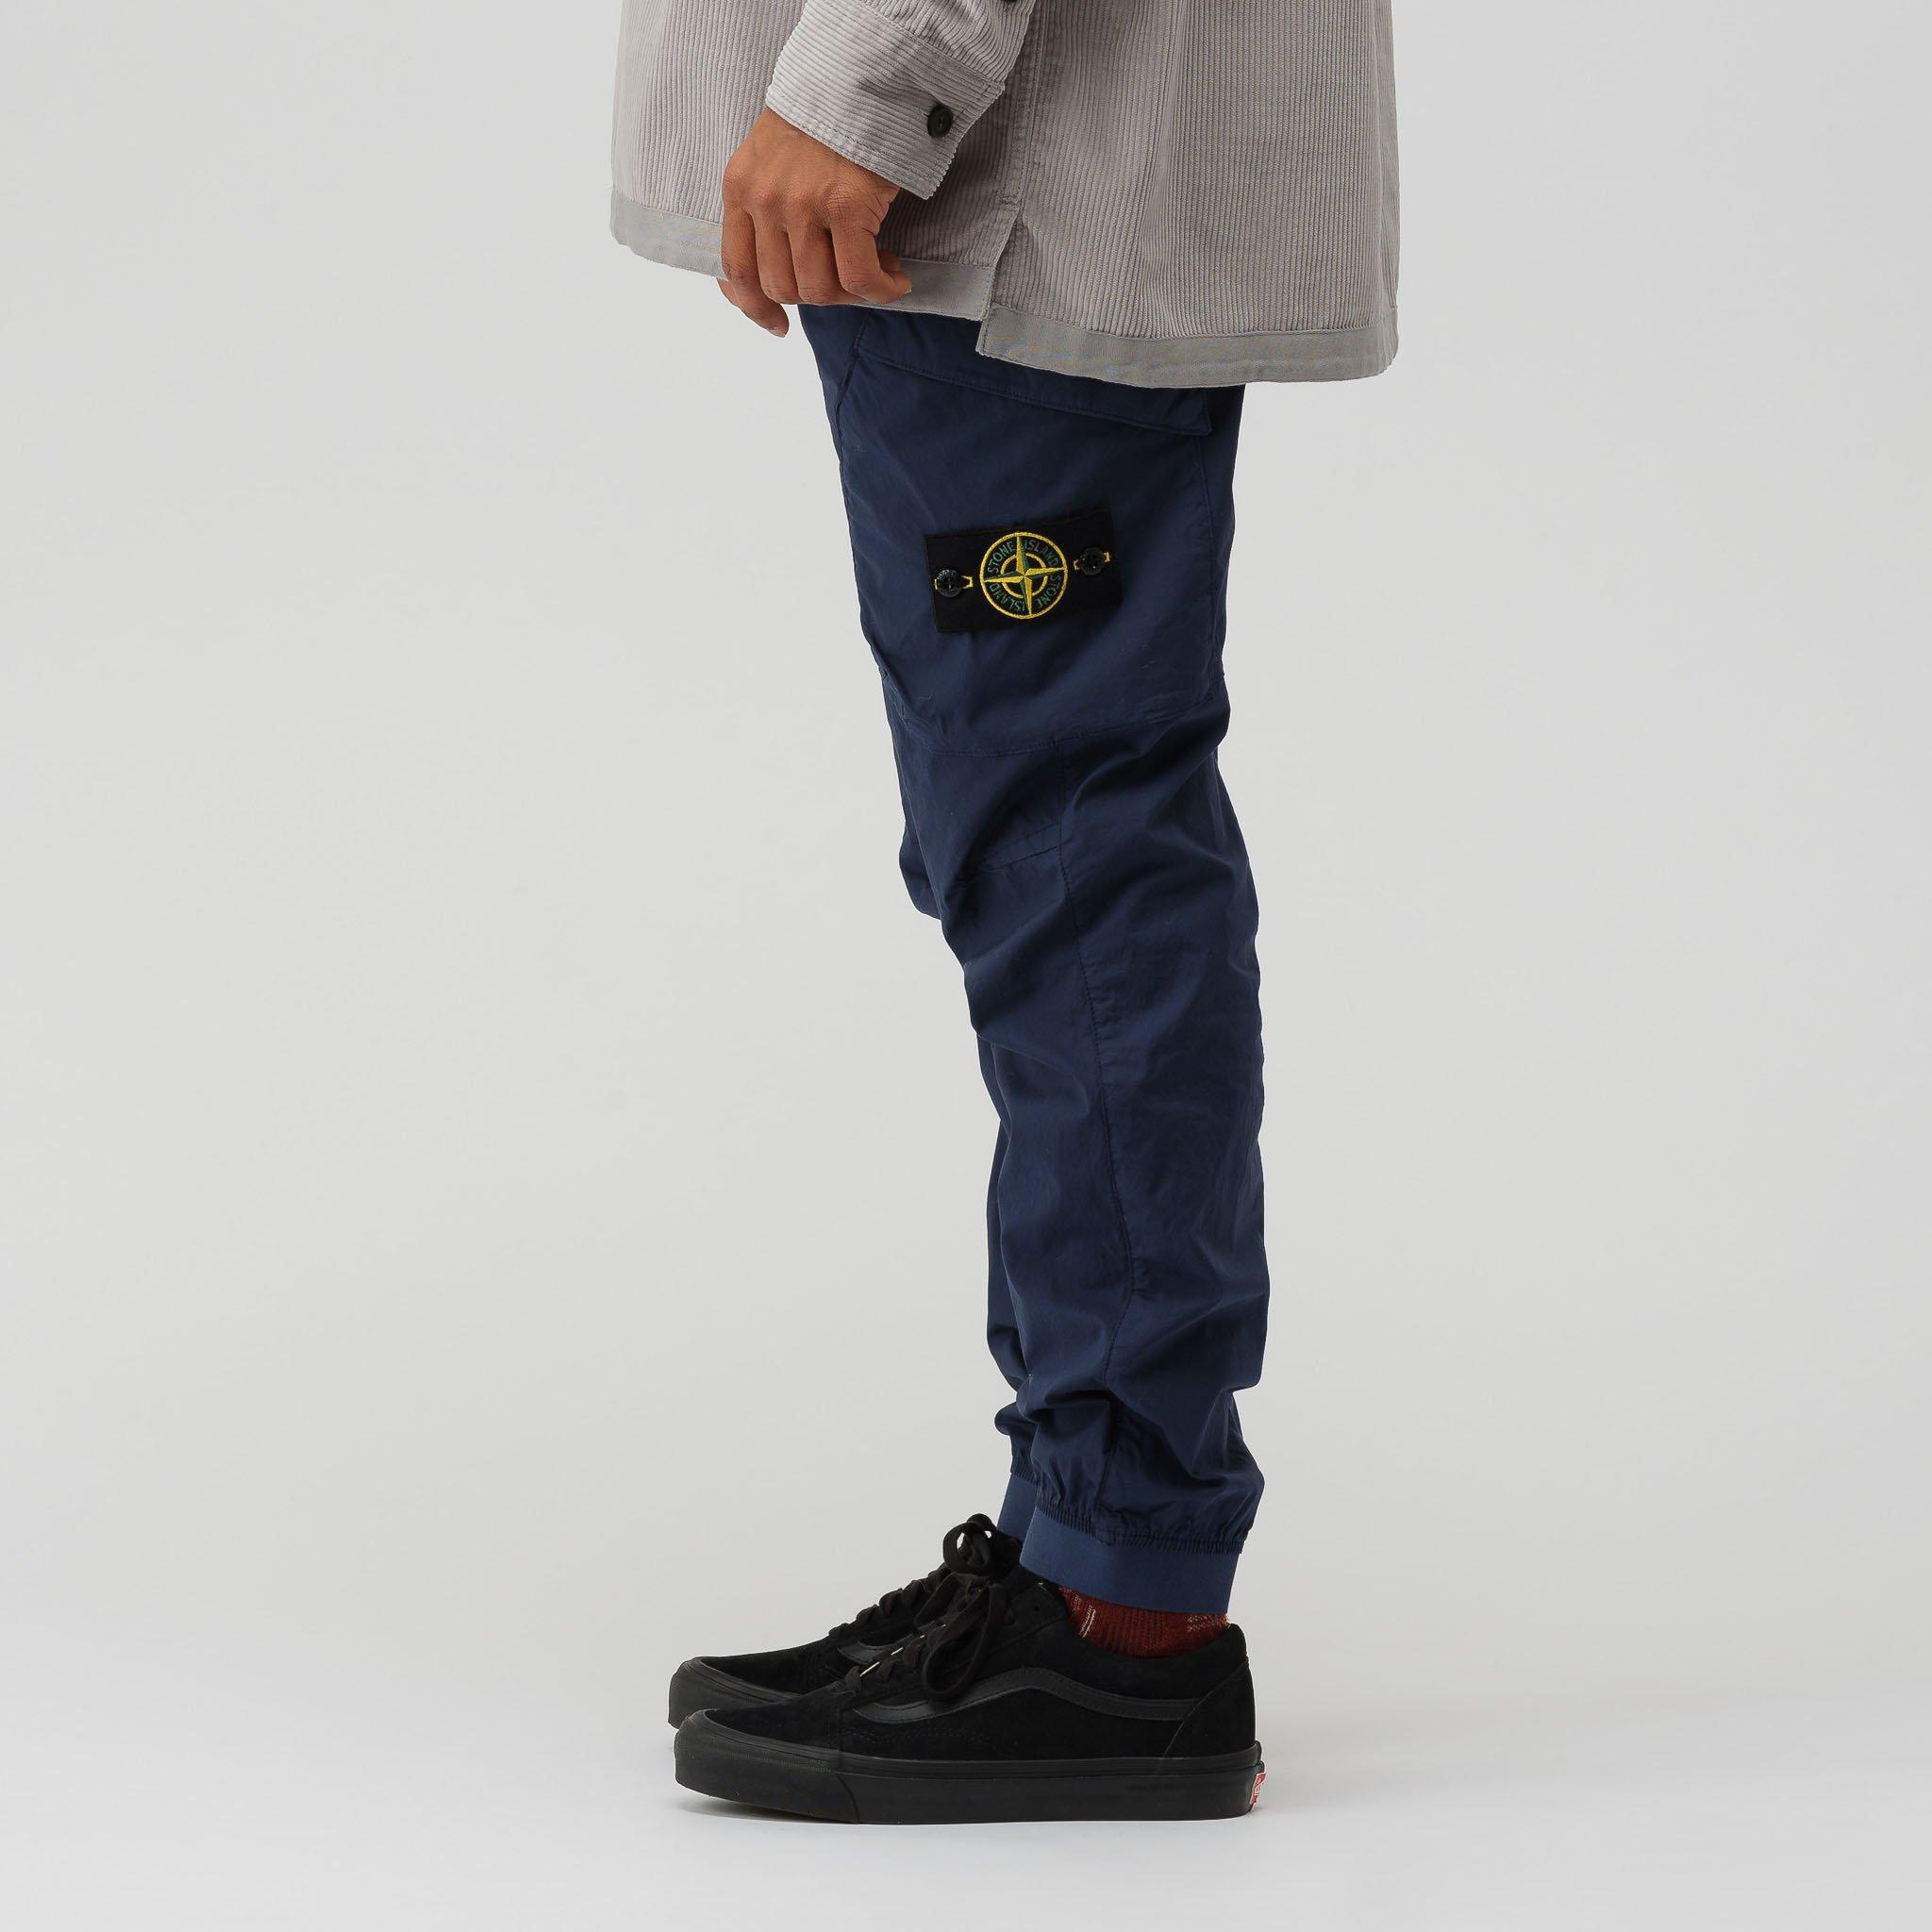 Stone Island Cotton 32203 Cargo Pant In Marine Blue for Men - Lyst